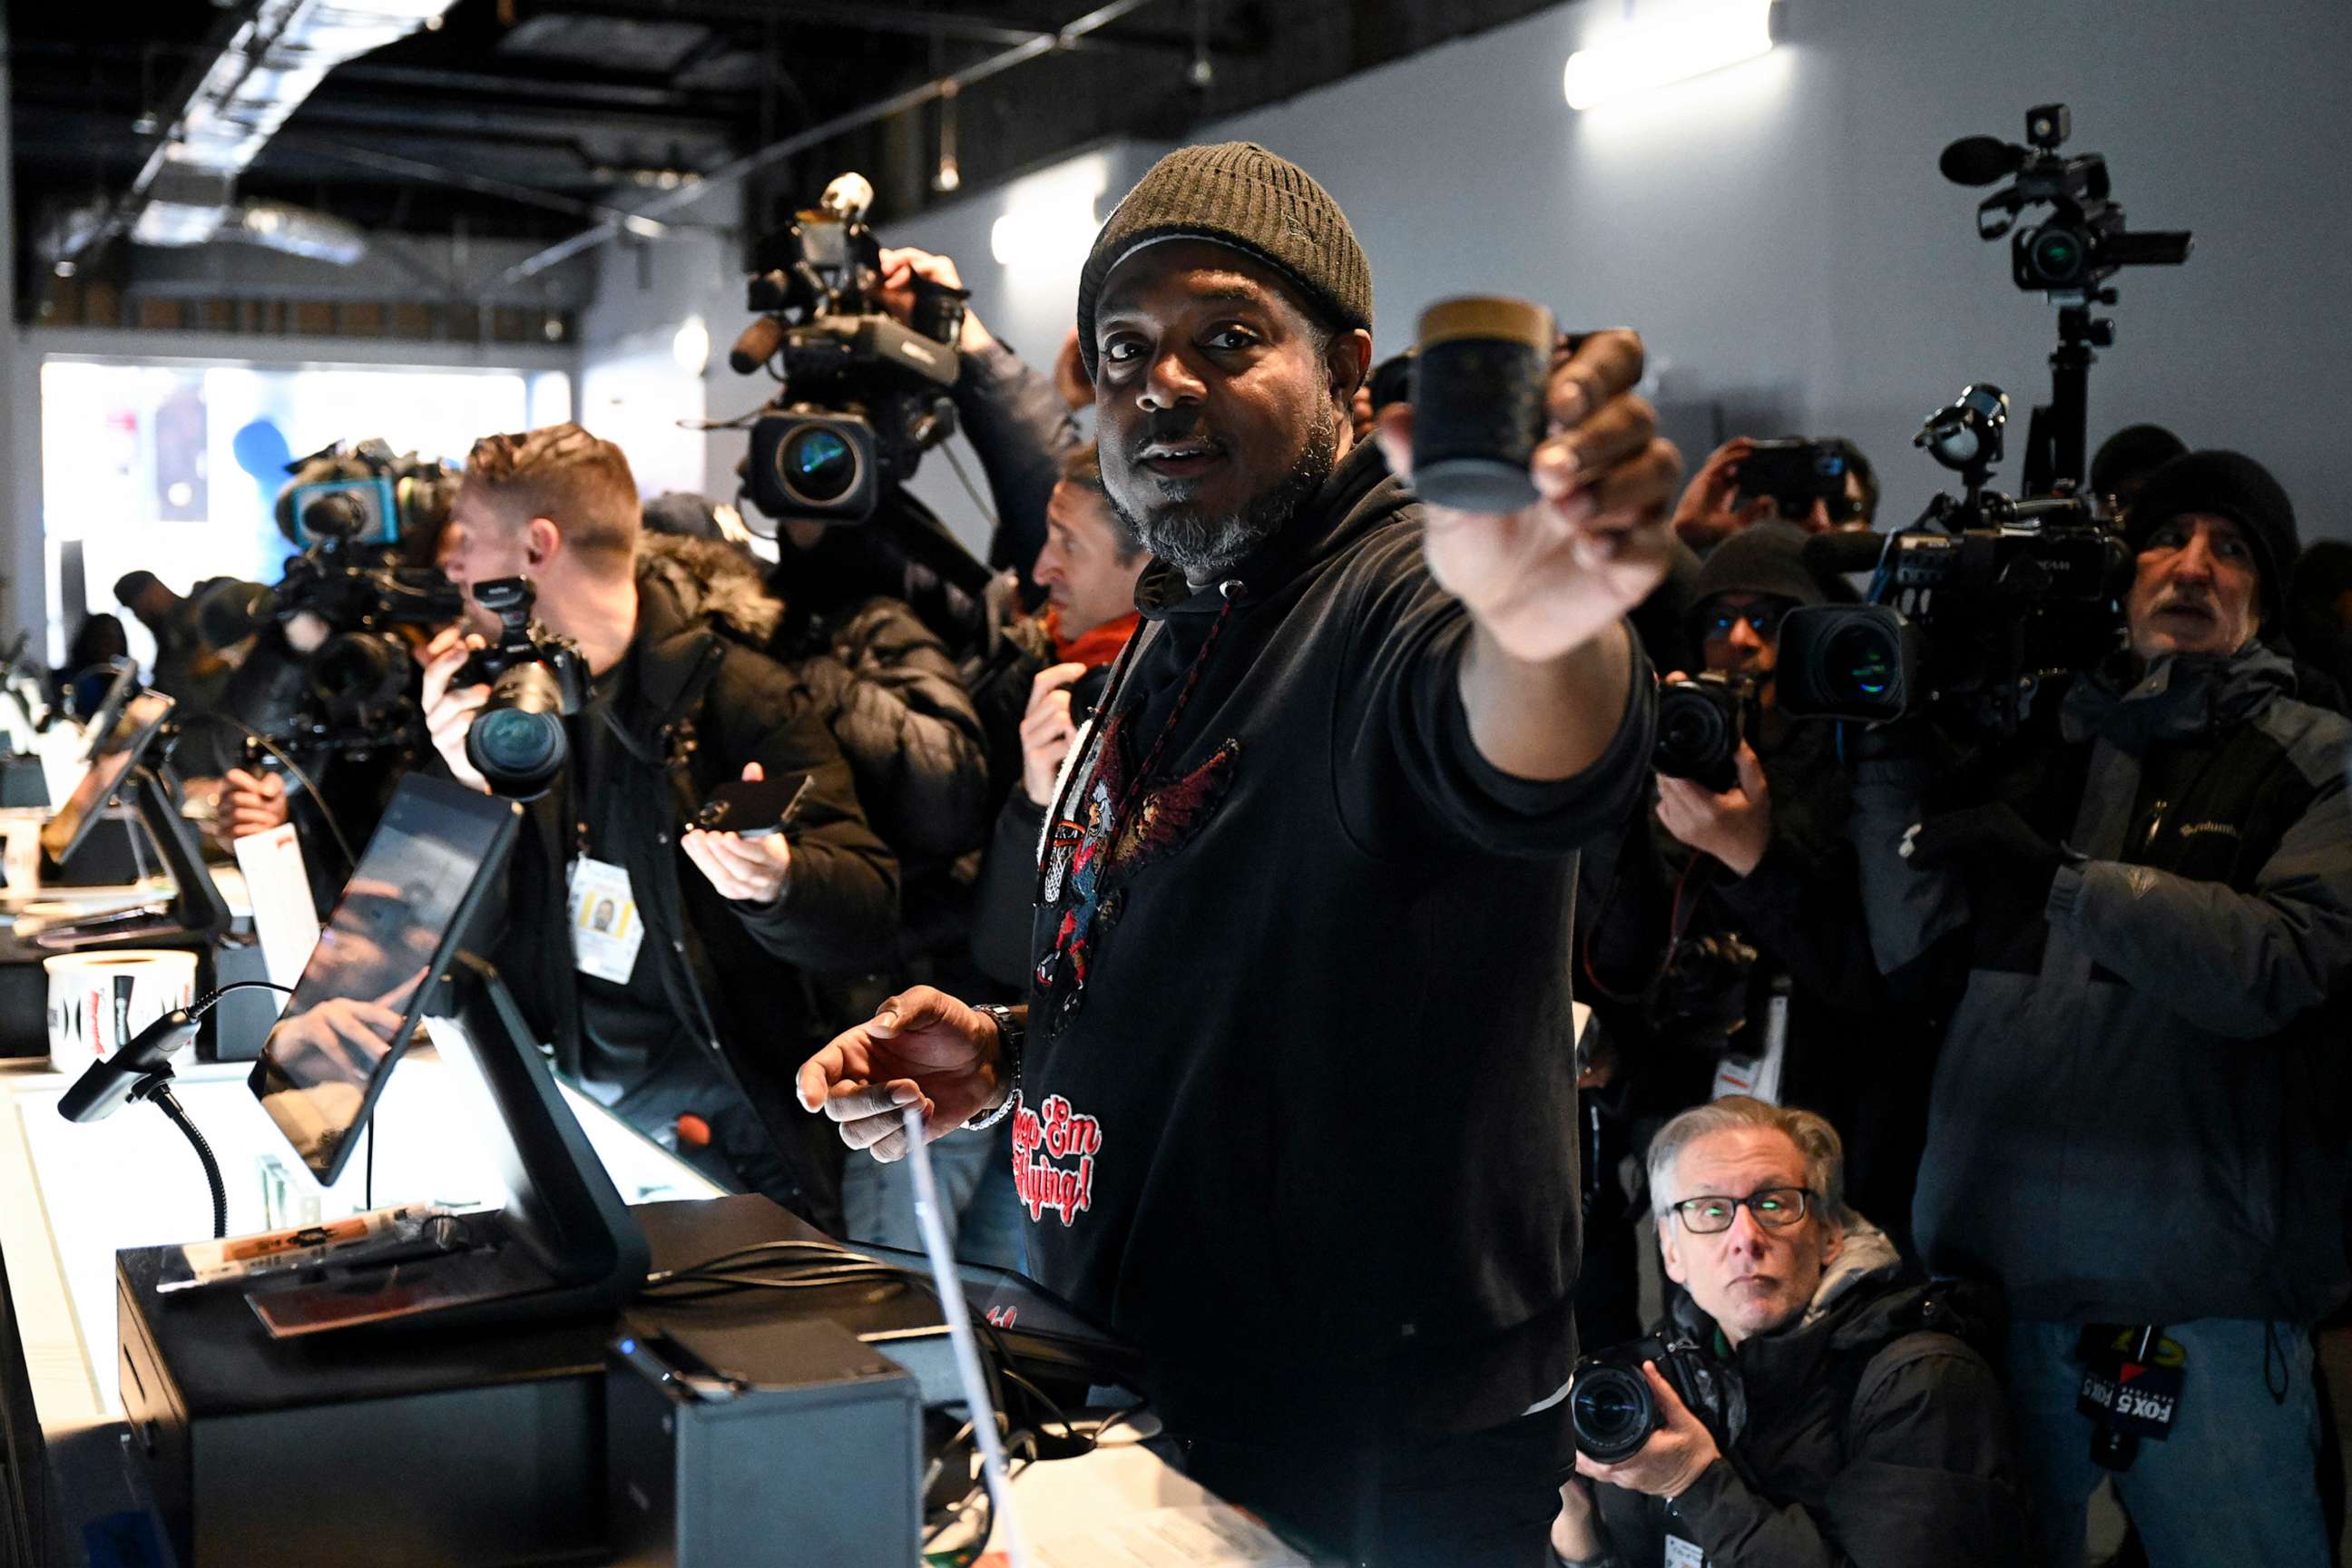 PHOTO: In this Jan. 24, 2023, file photo, owner Roland Conner makes the first marijuana purchase from his son Darius at the opening of Smacked LLC, the first New York cannabis dispensary owned by a justice impacted individual in New York.